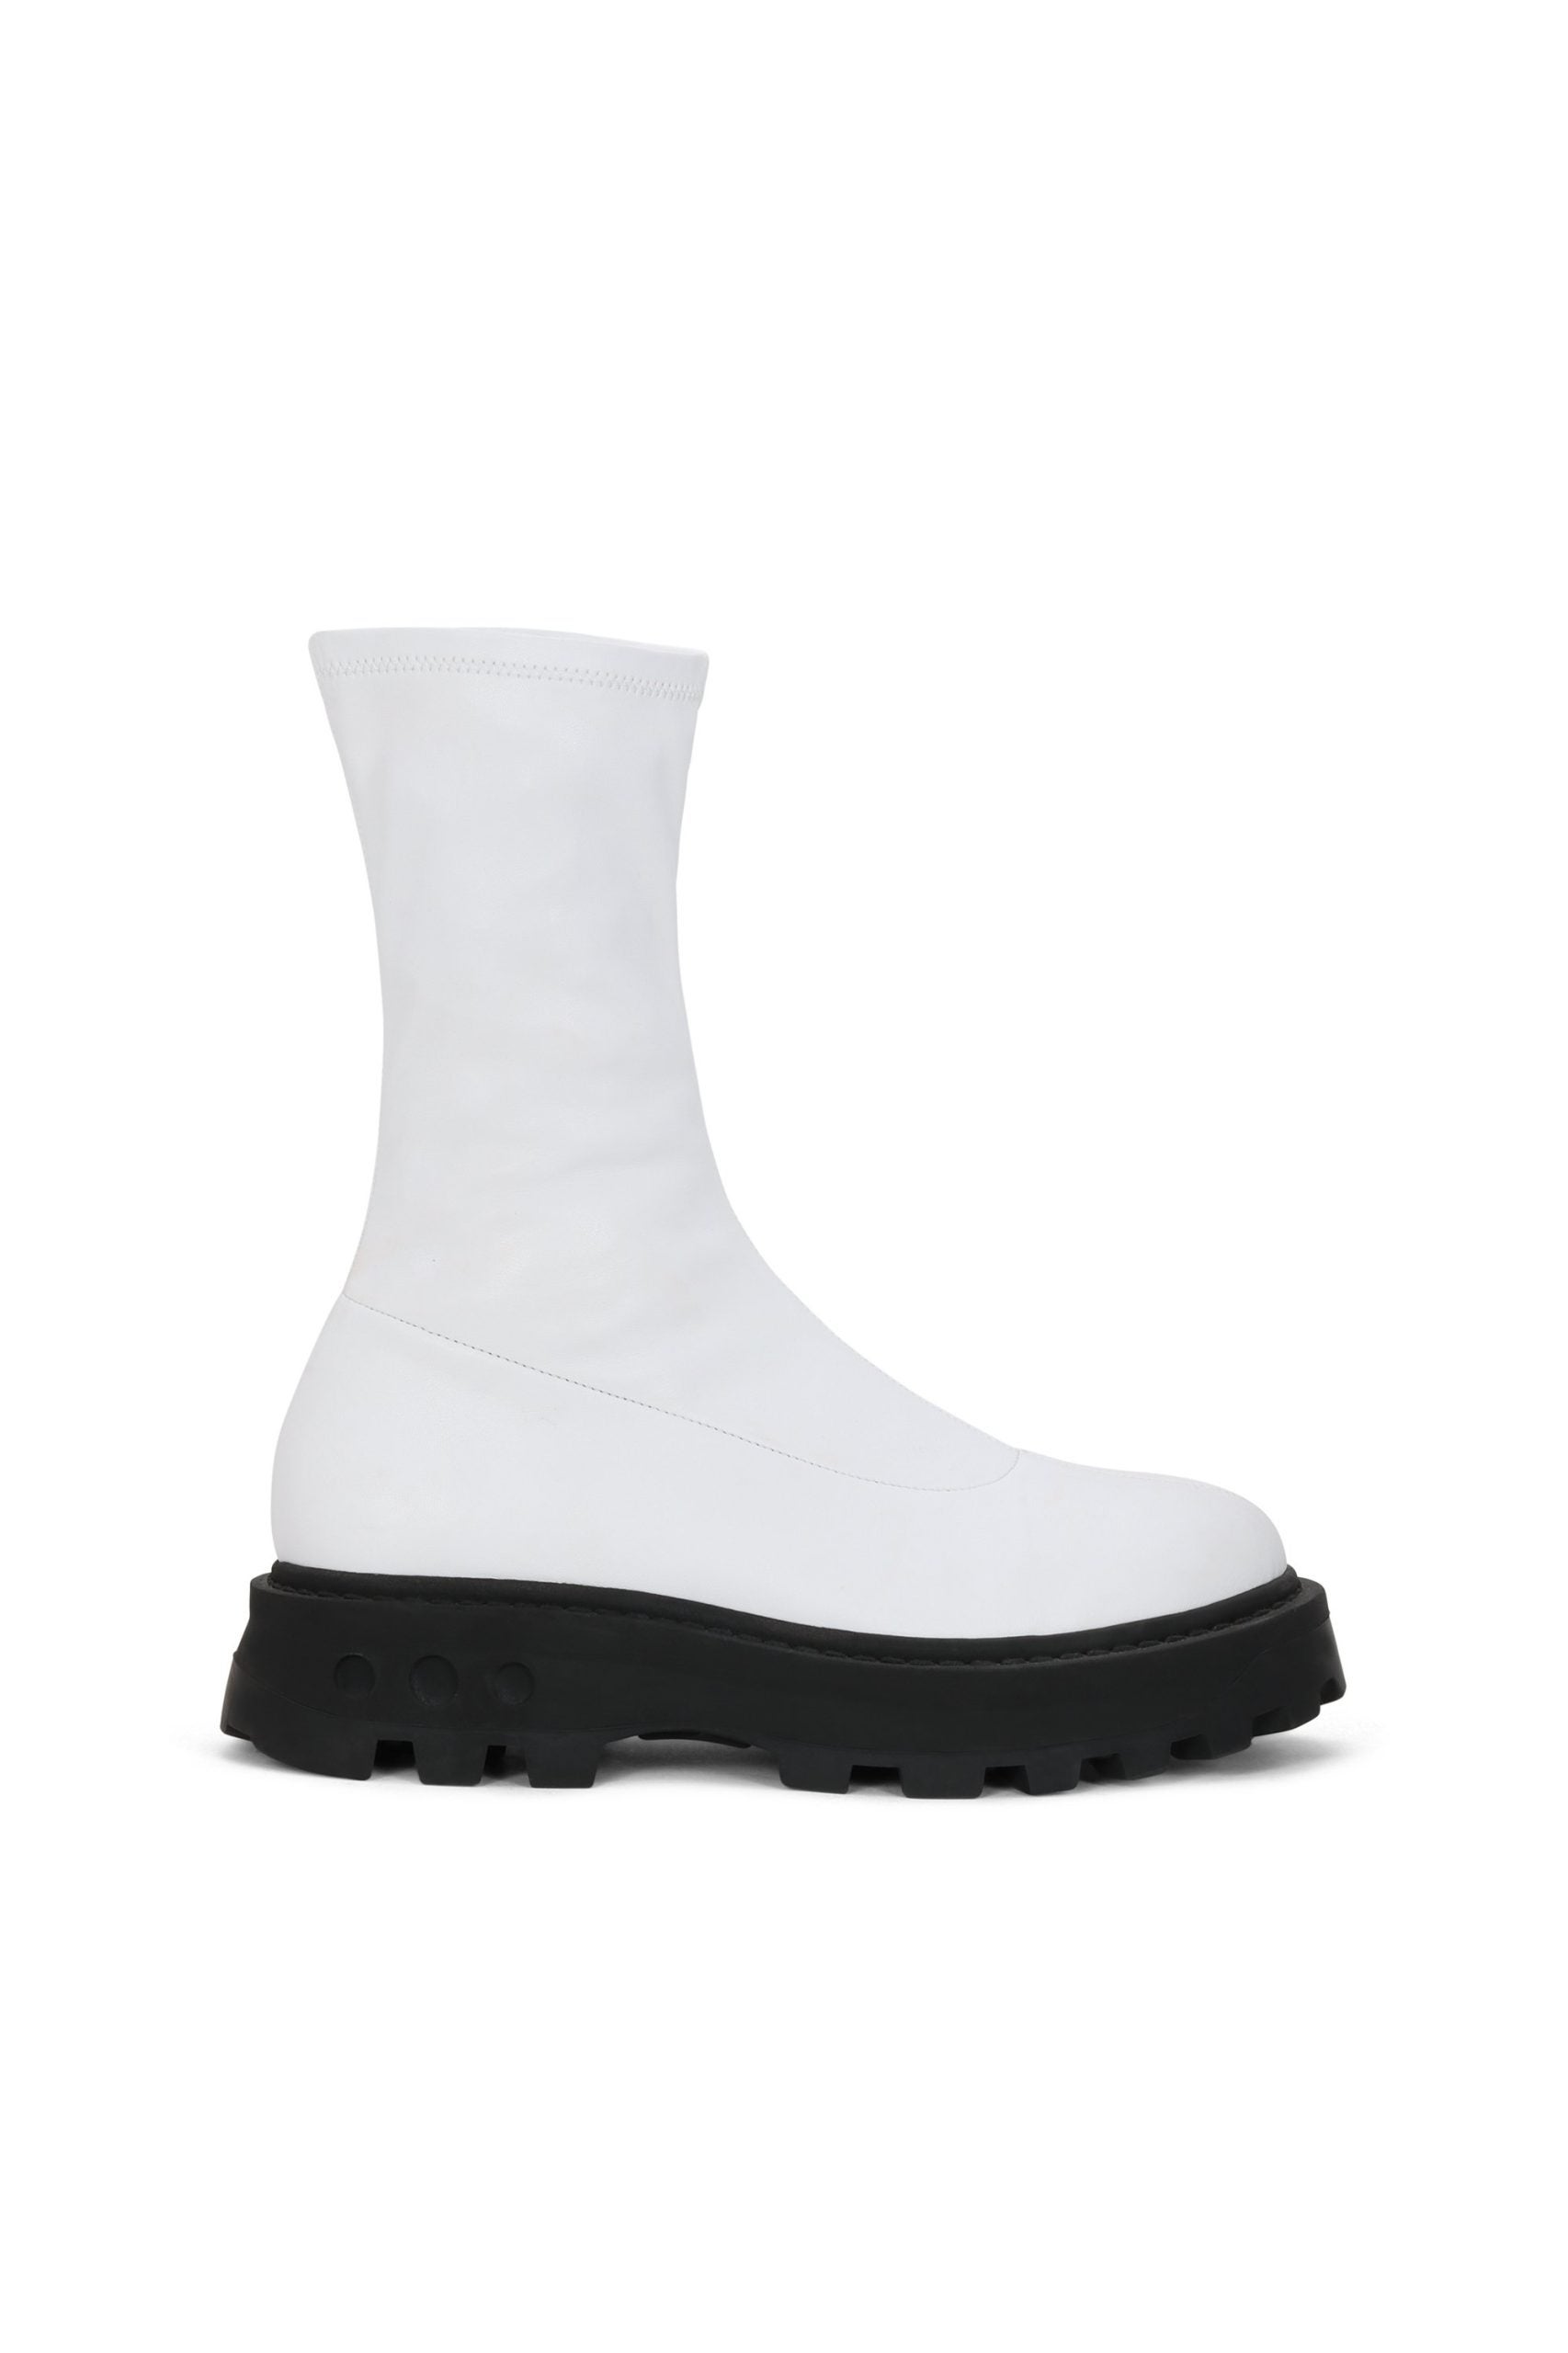 ‘Winter White’ Boots Are The Hottest Footwear Trend To Shop This Black ...